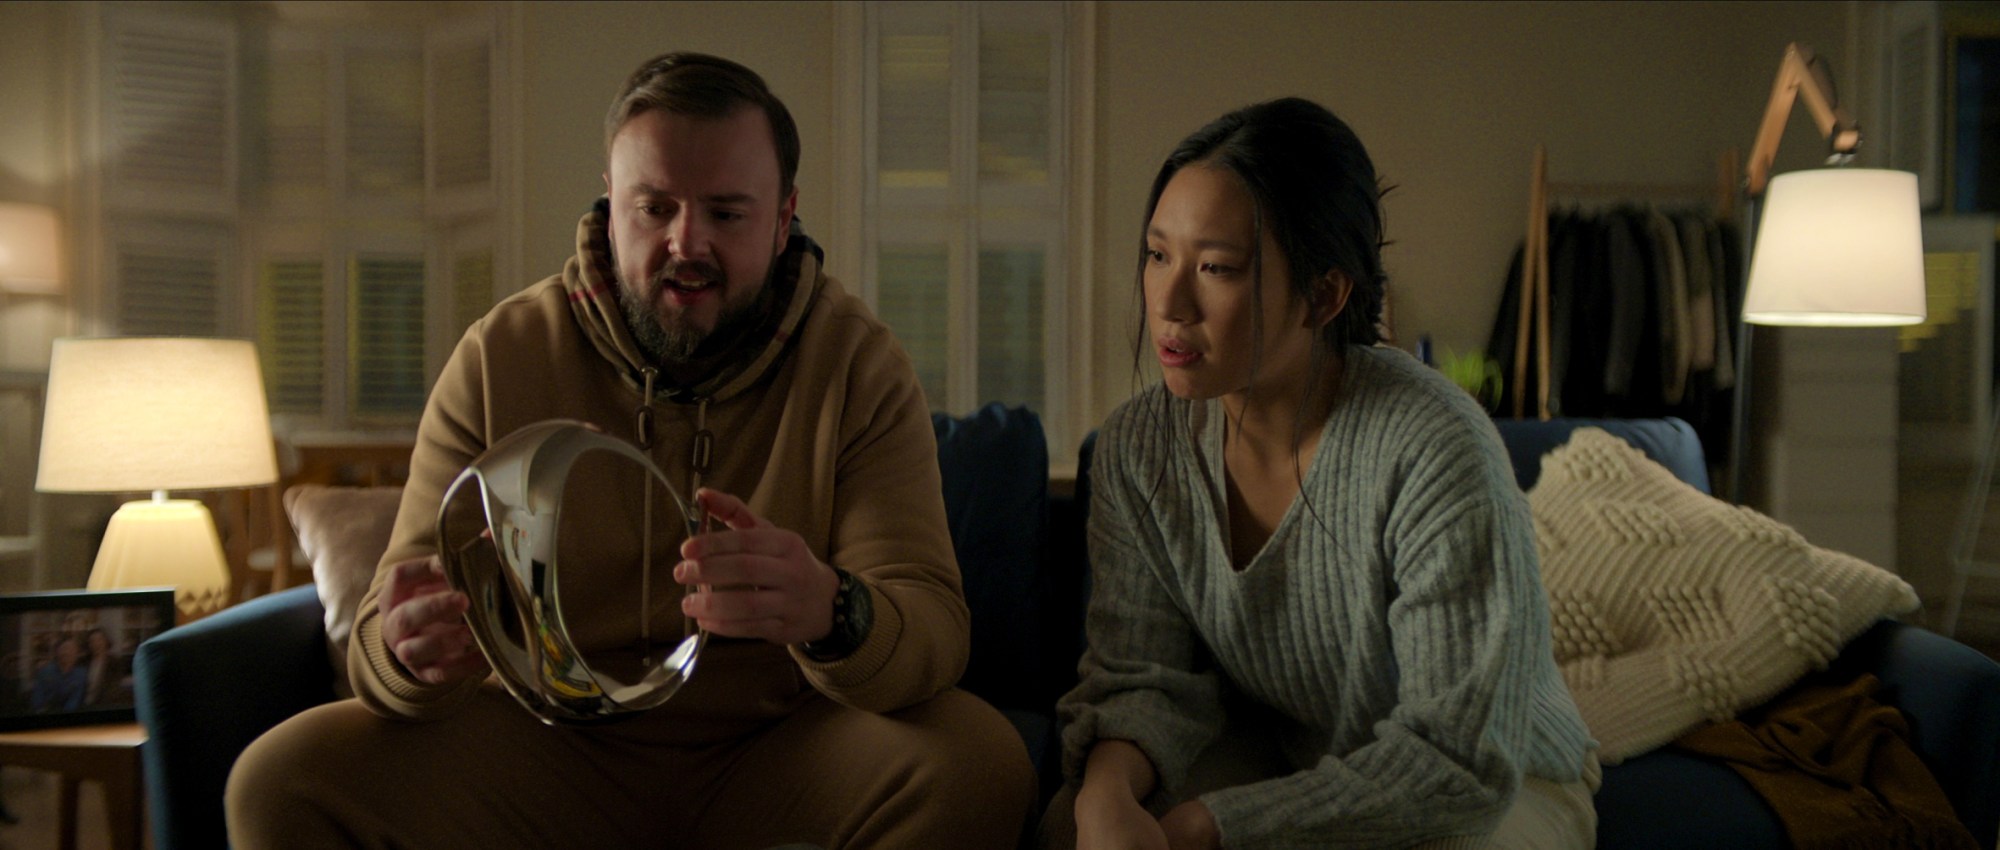 John Bradley's Jack examines an advanced virtual-reality headset that's been given to Jess Hong's Jin in "3 Body Problem." (Courtesy of Netflix)